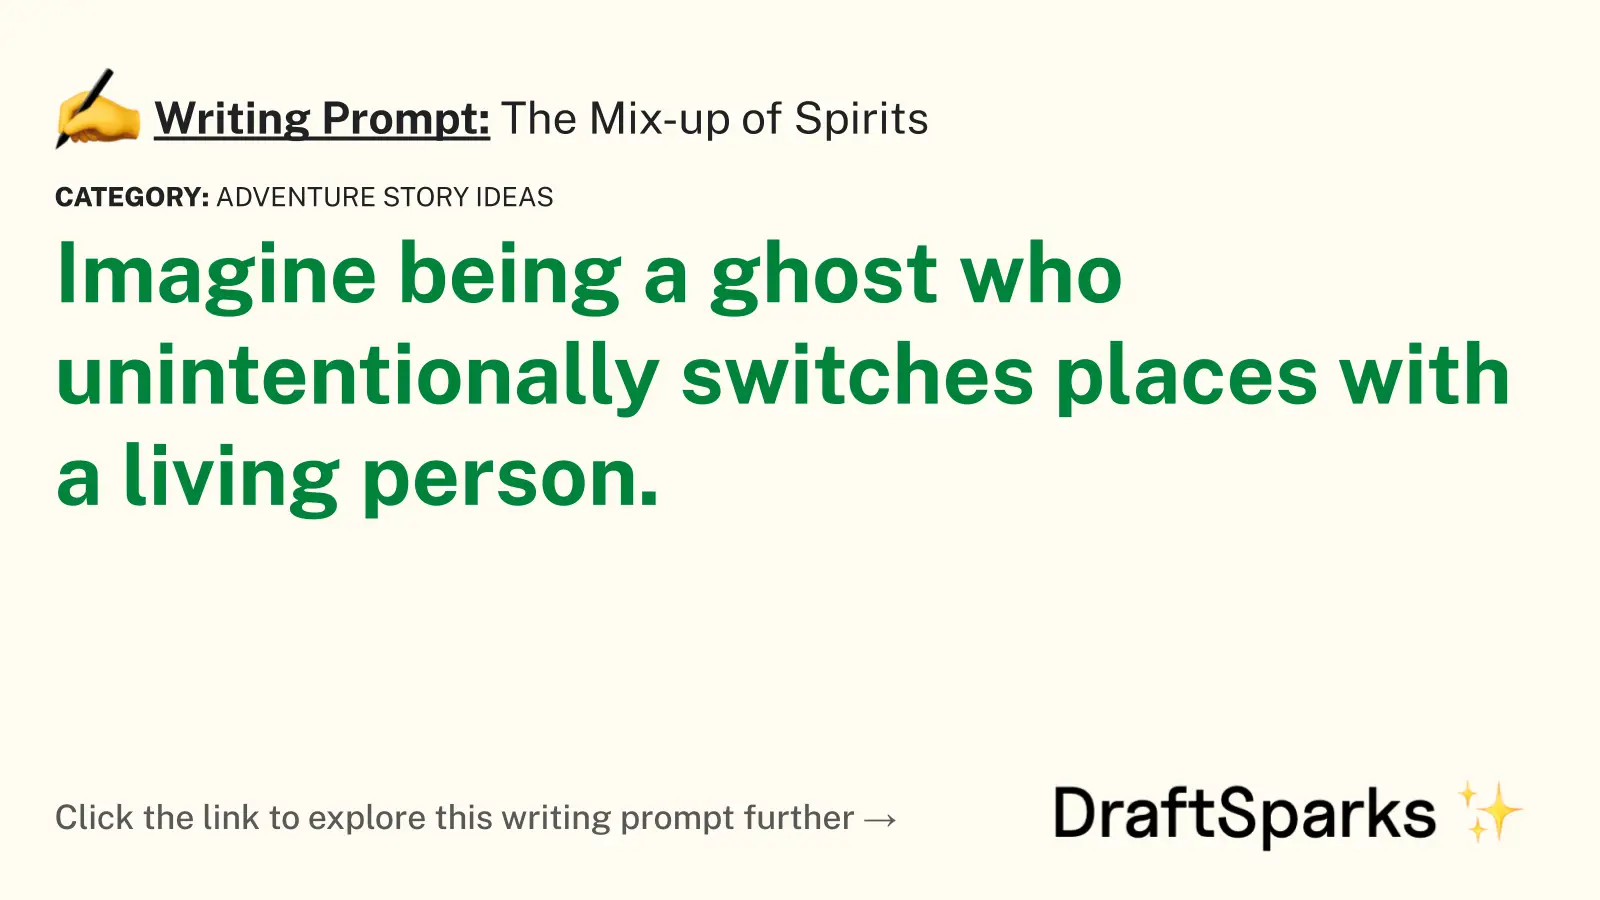 The Mix-up of Spirits